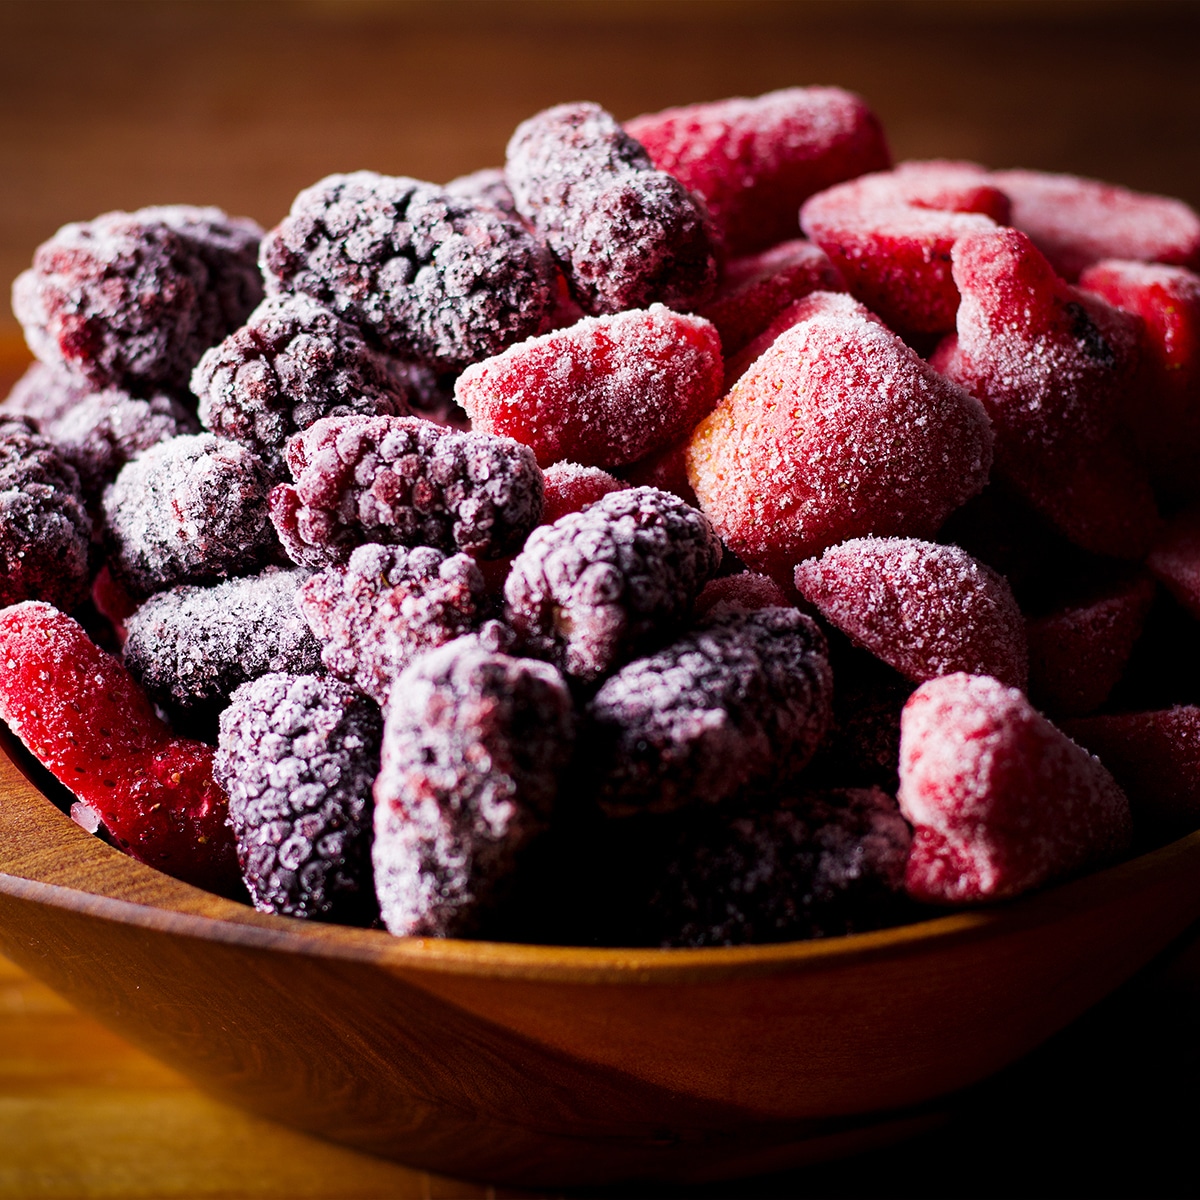 A wood bowl filled with frozen mixed berries.